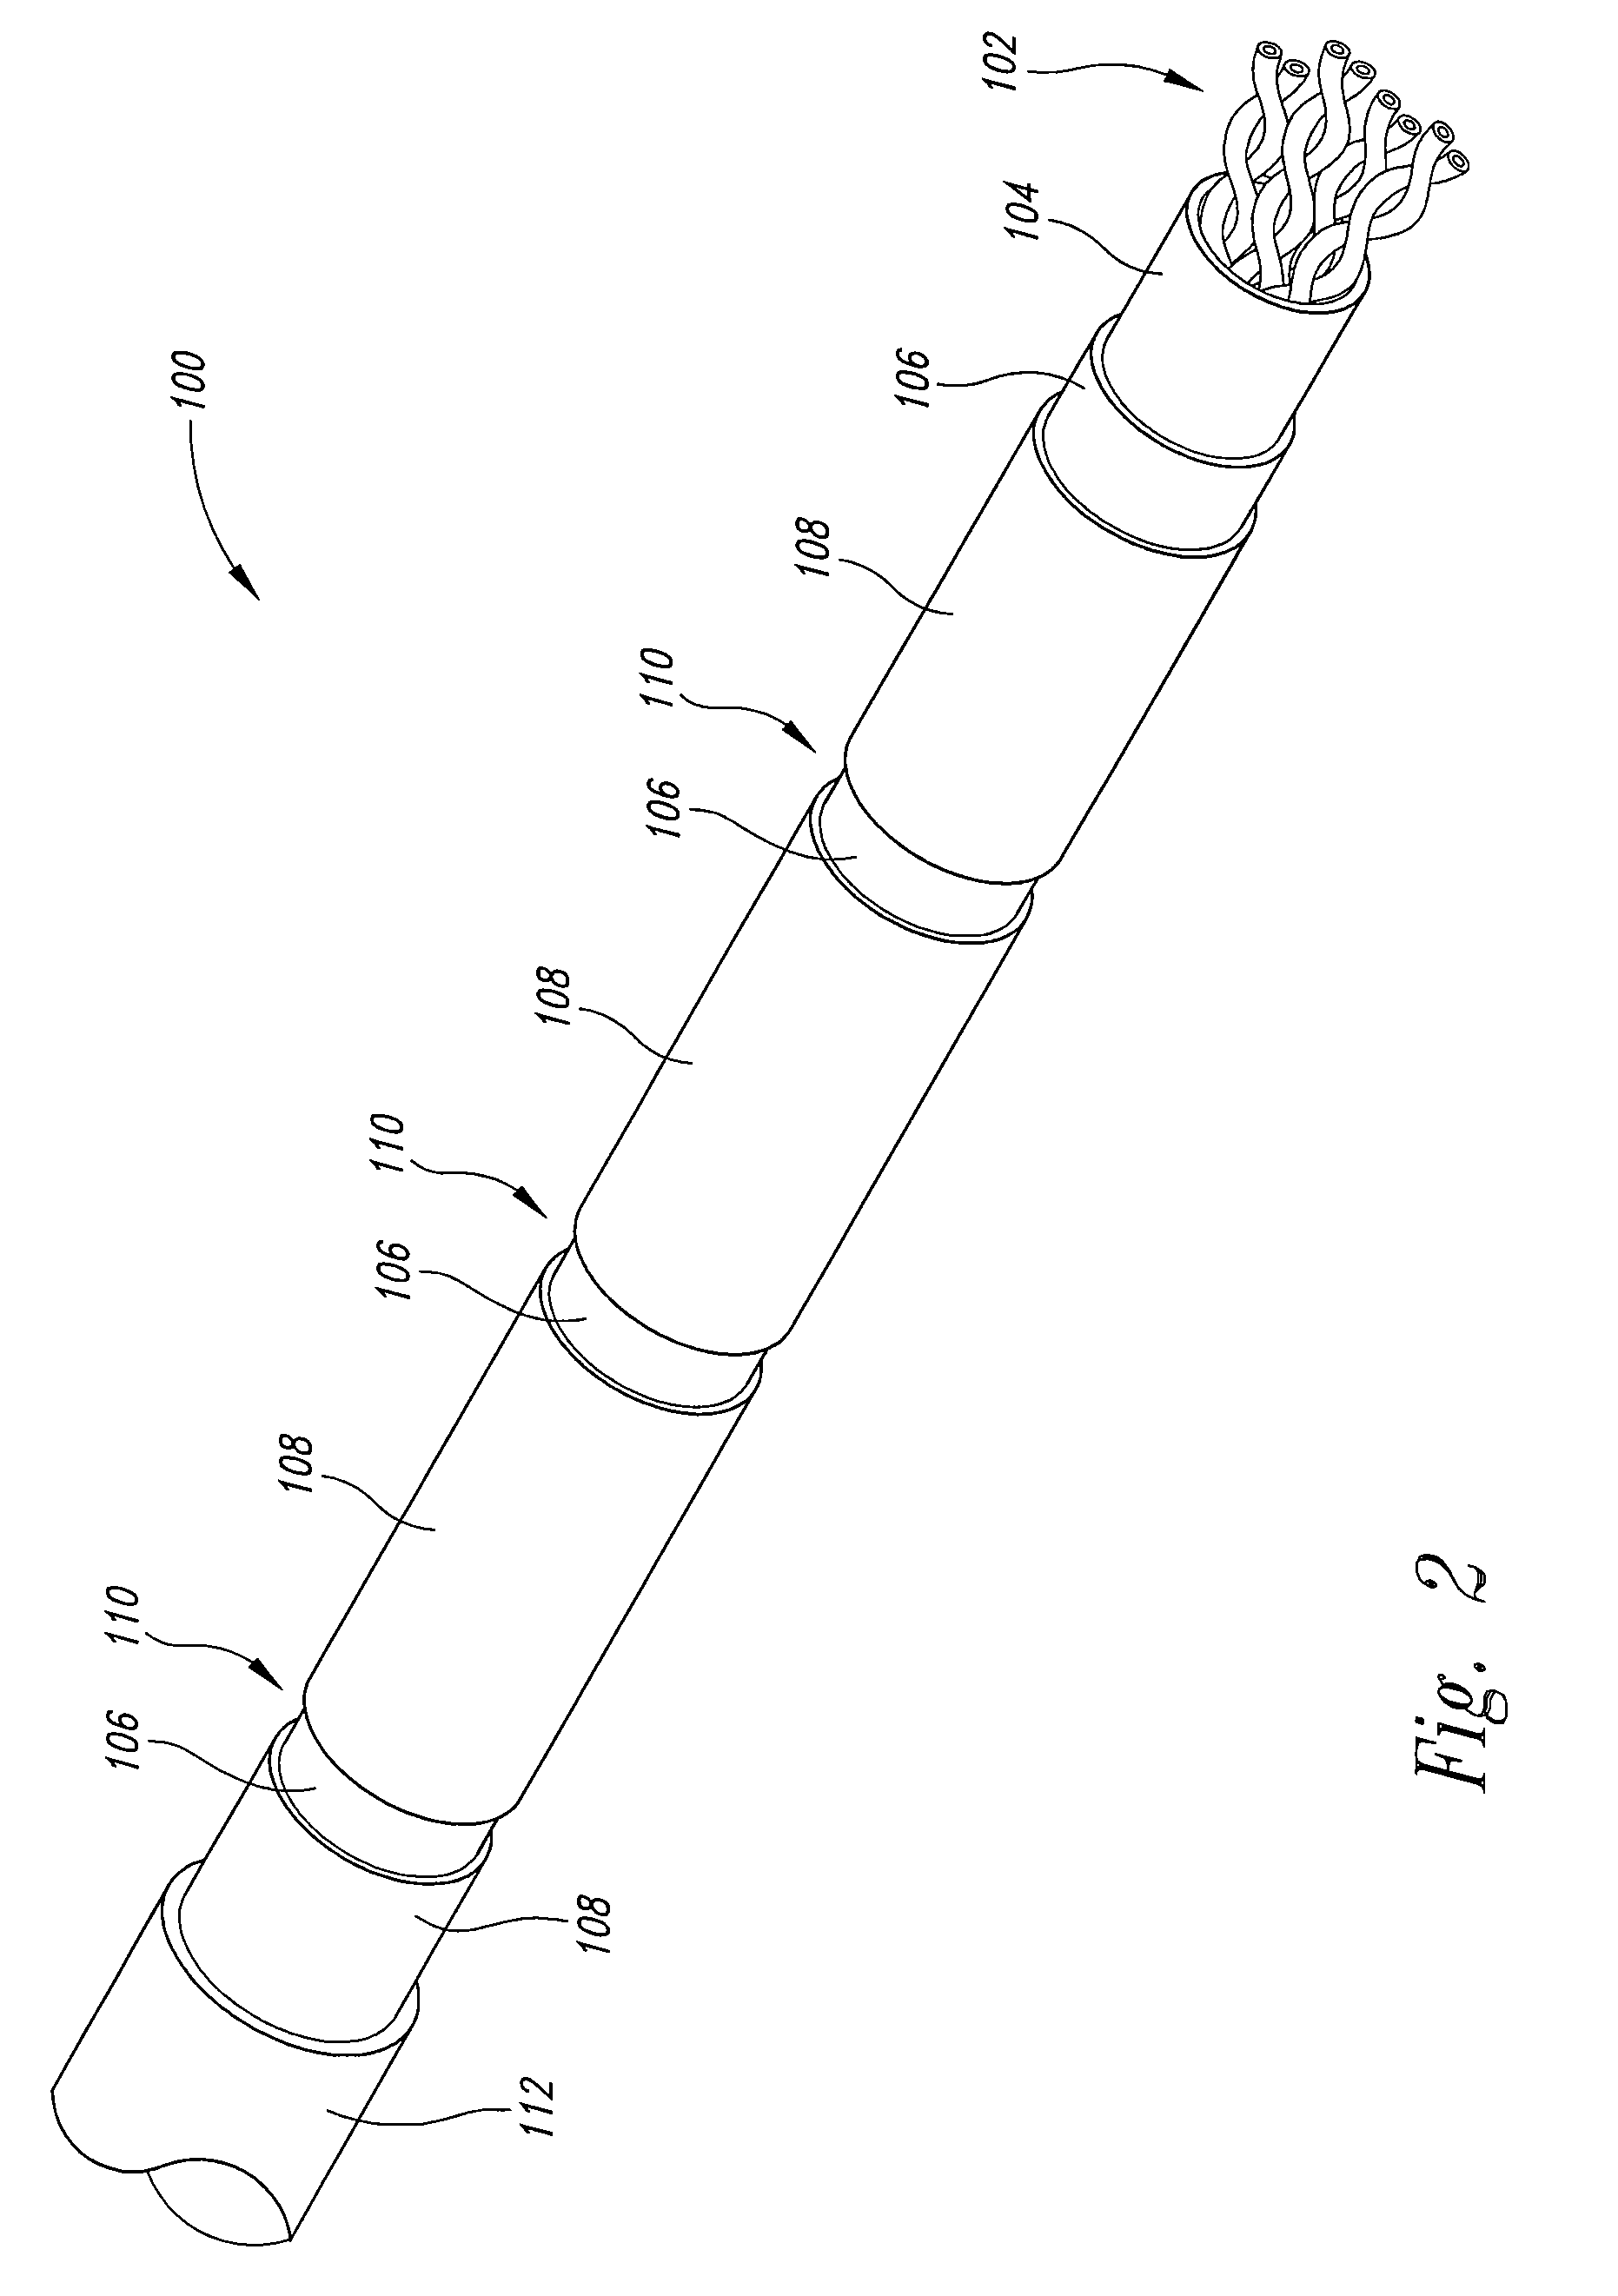 Discontinued cable shield system and method